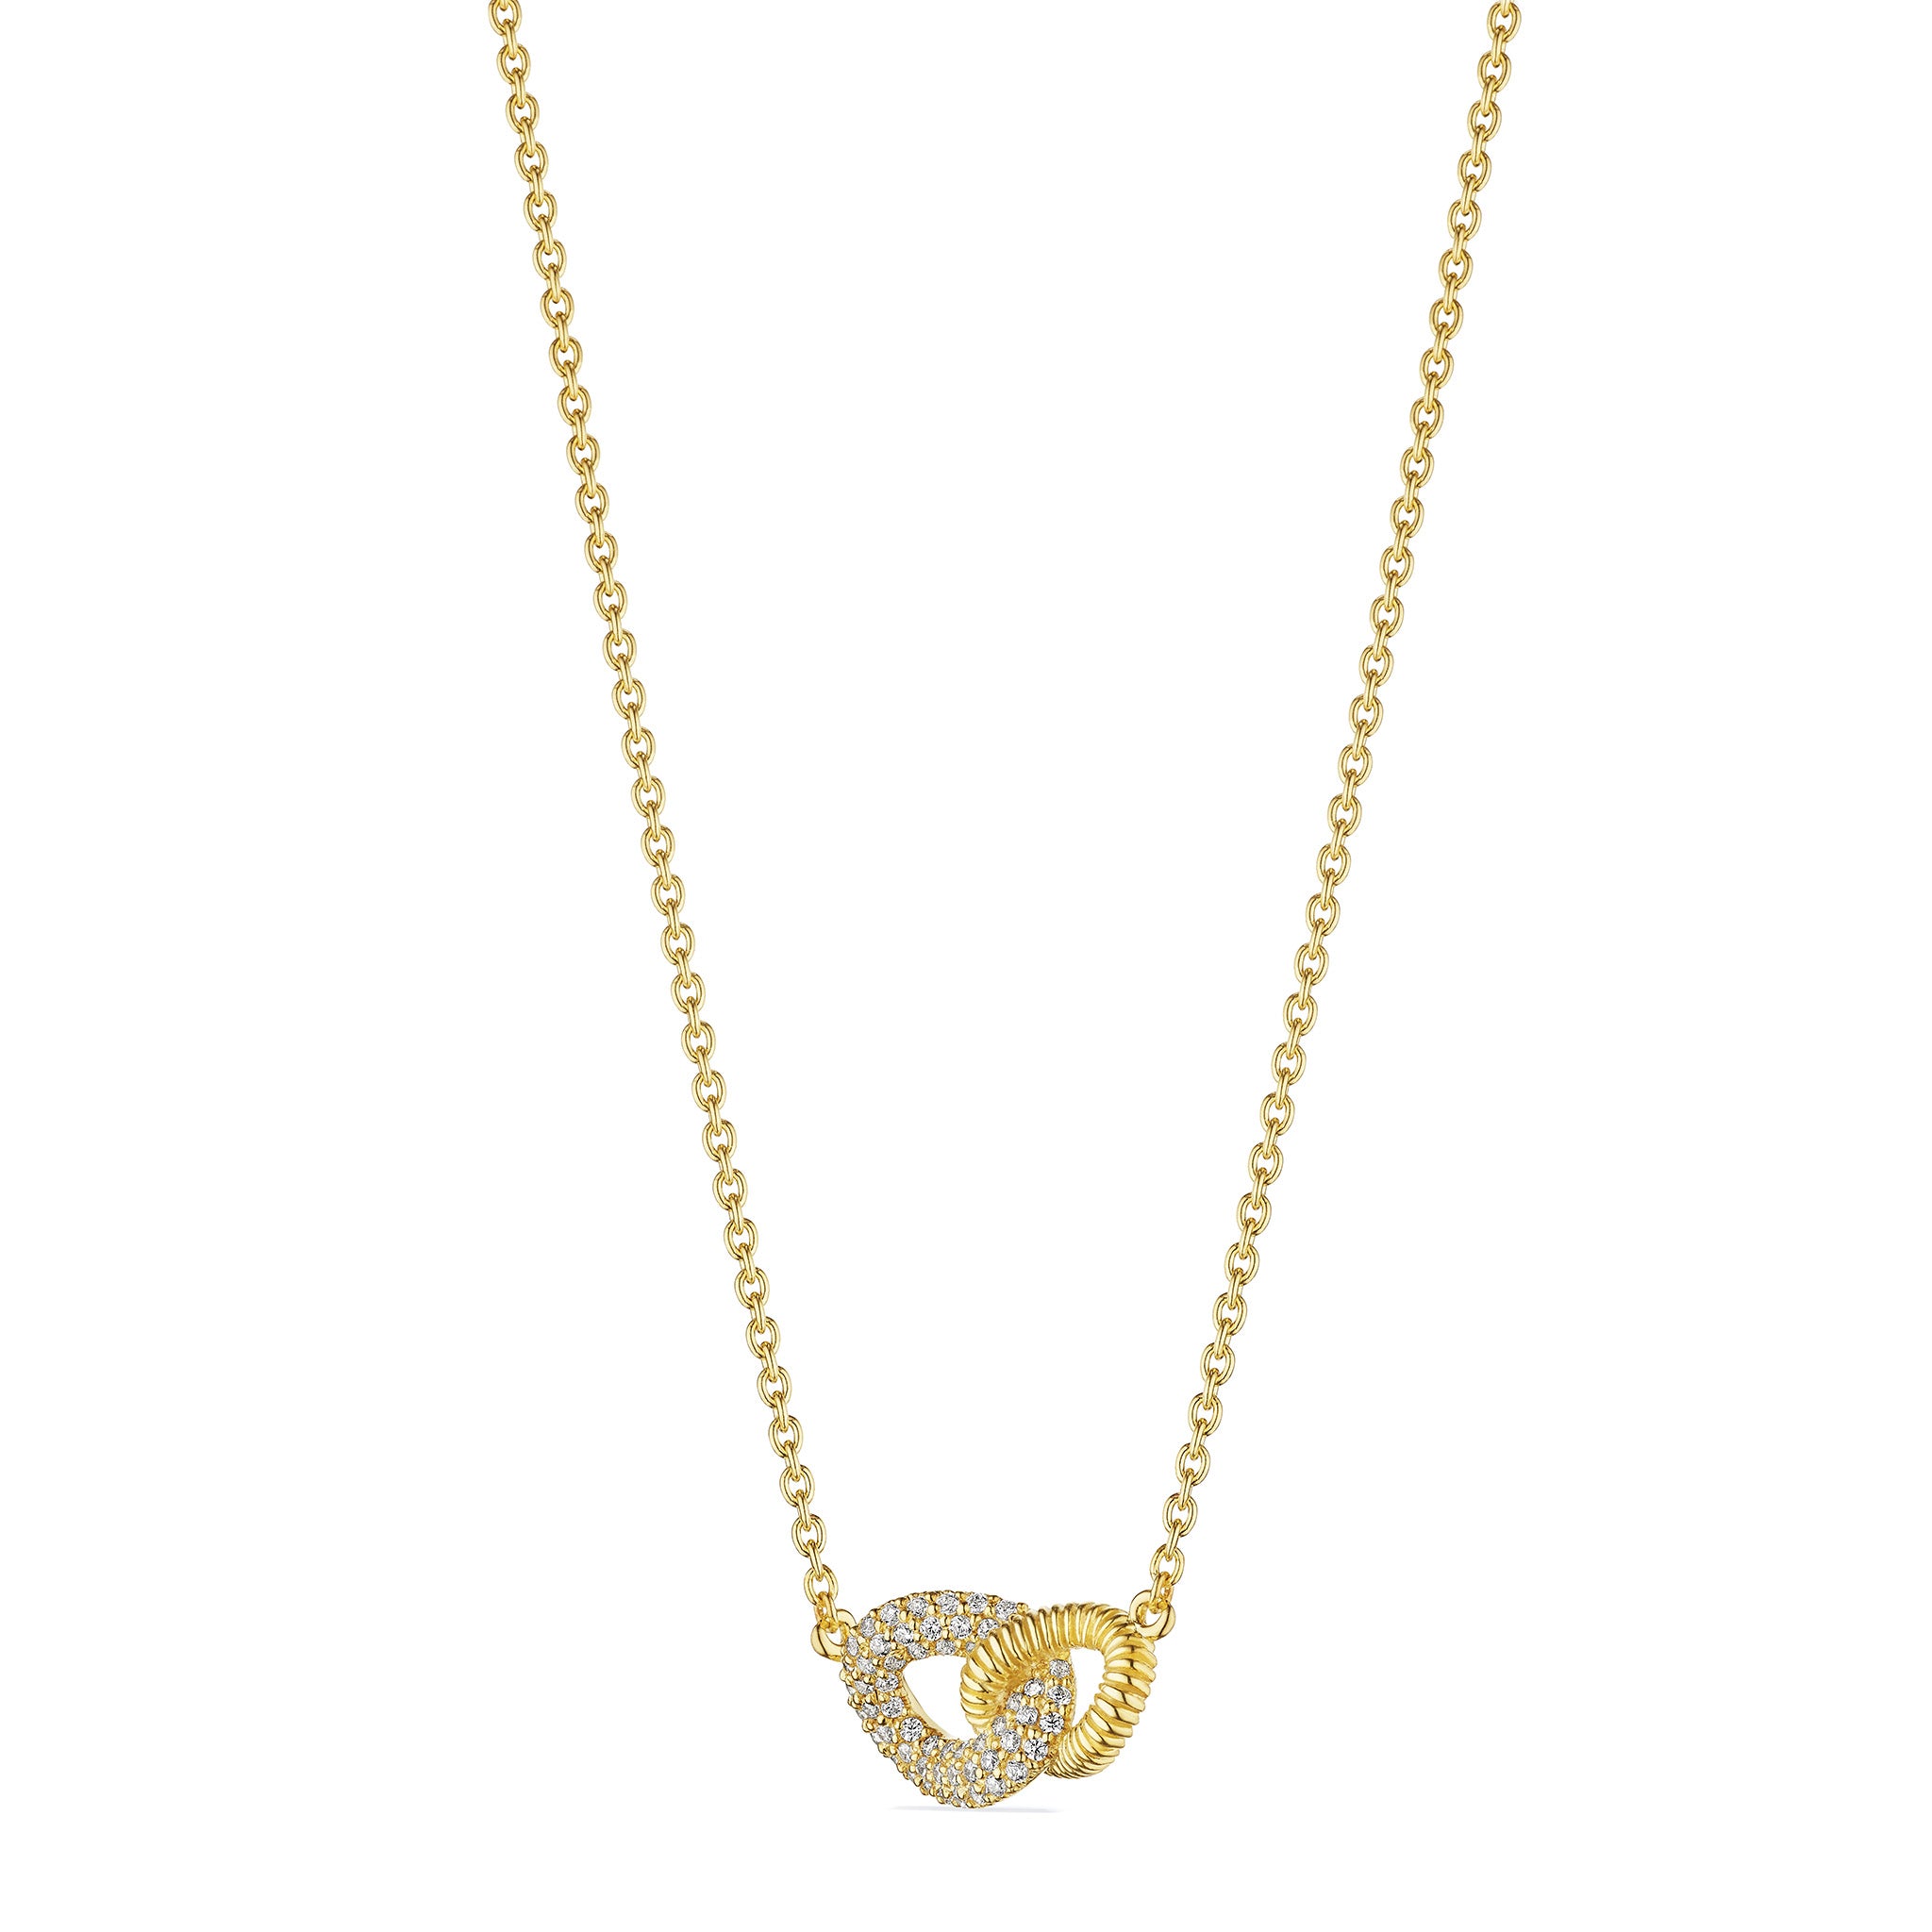 Eternity Link Necklace with Diamonds in 18K